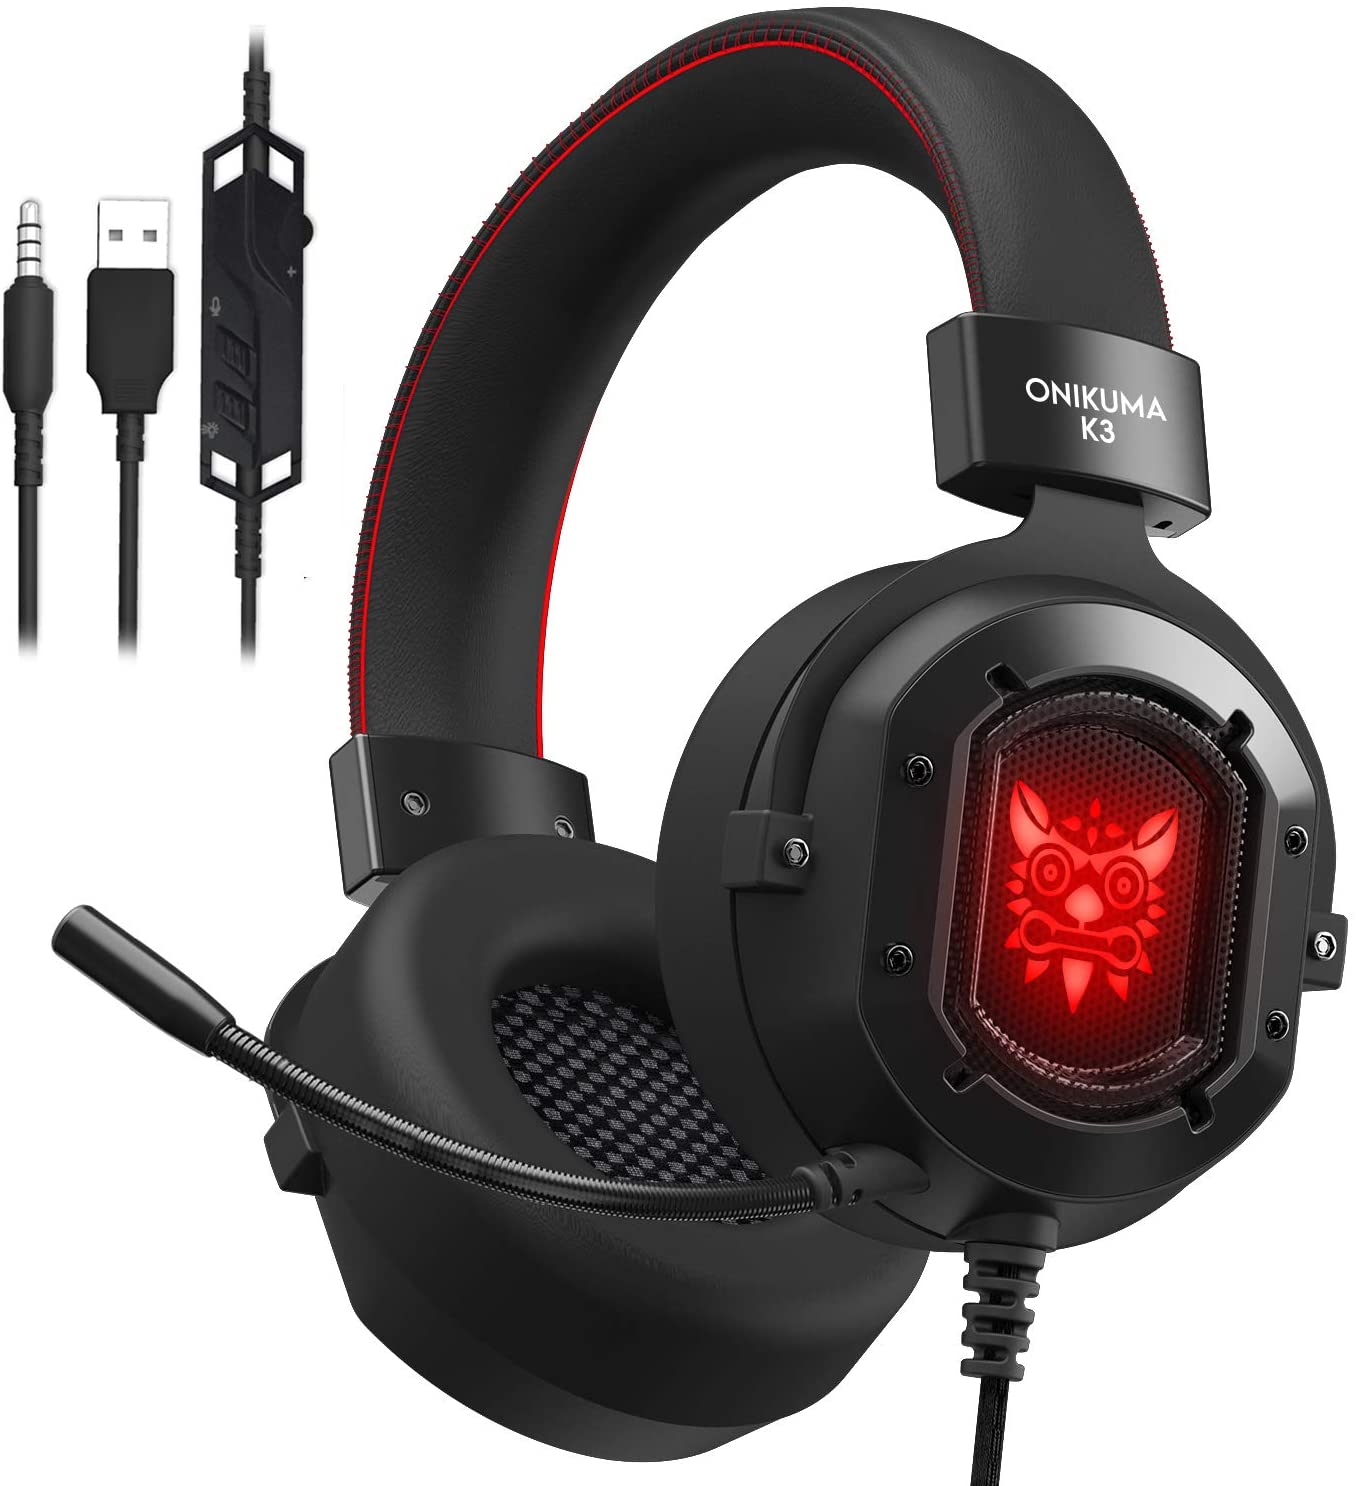 Gaming Headset, MMUSC Stereo Headphones for Laptop, Tablet, PS4, PC, Xbox One Controller, Noise Cancelling Over Ear Headset with Mic, LED Light, Bass Surround